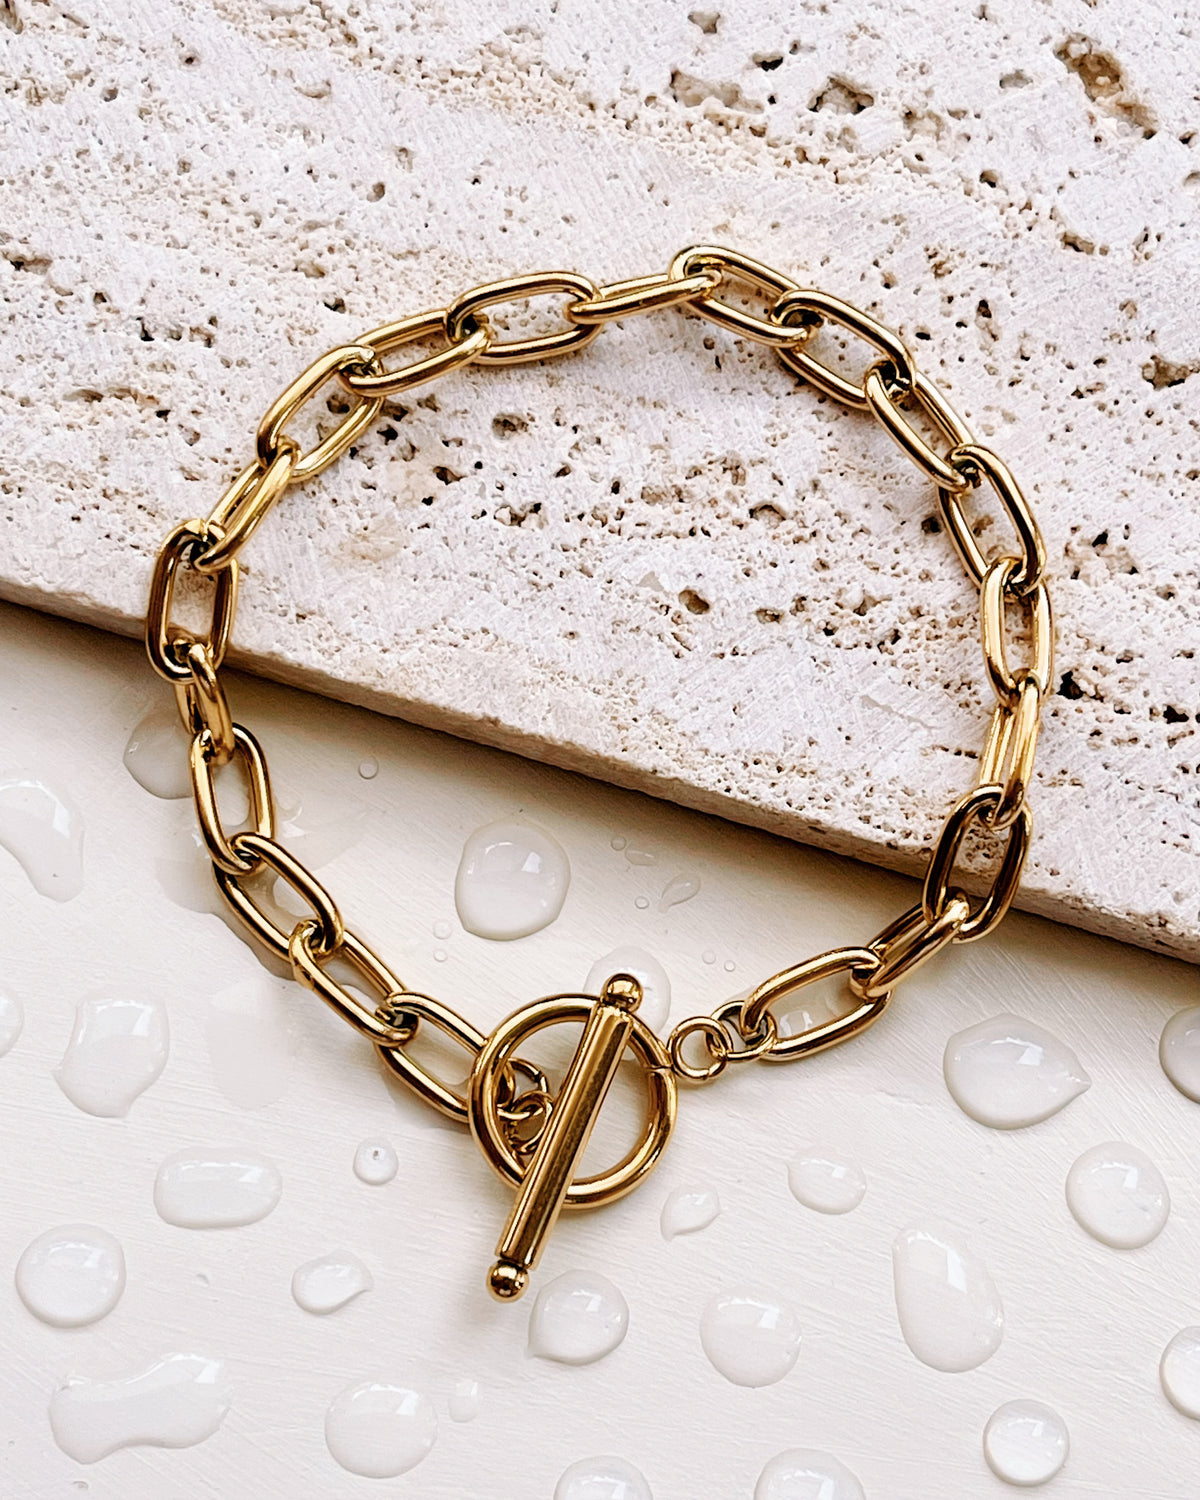 Emilia Thick Oval Link Chain with O/T Lock Design Gold Bracelet